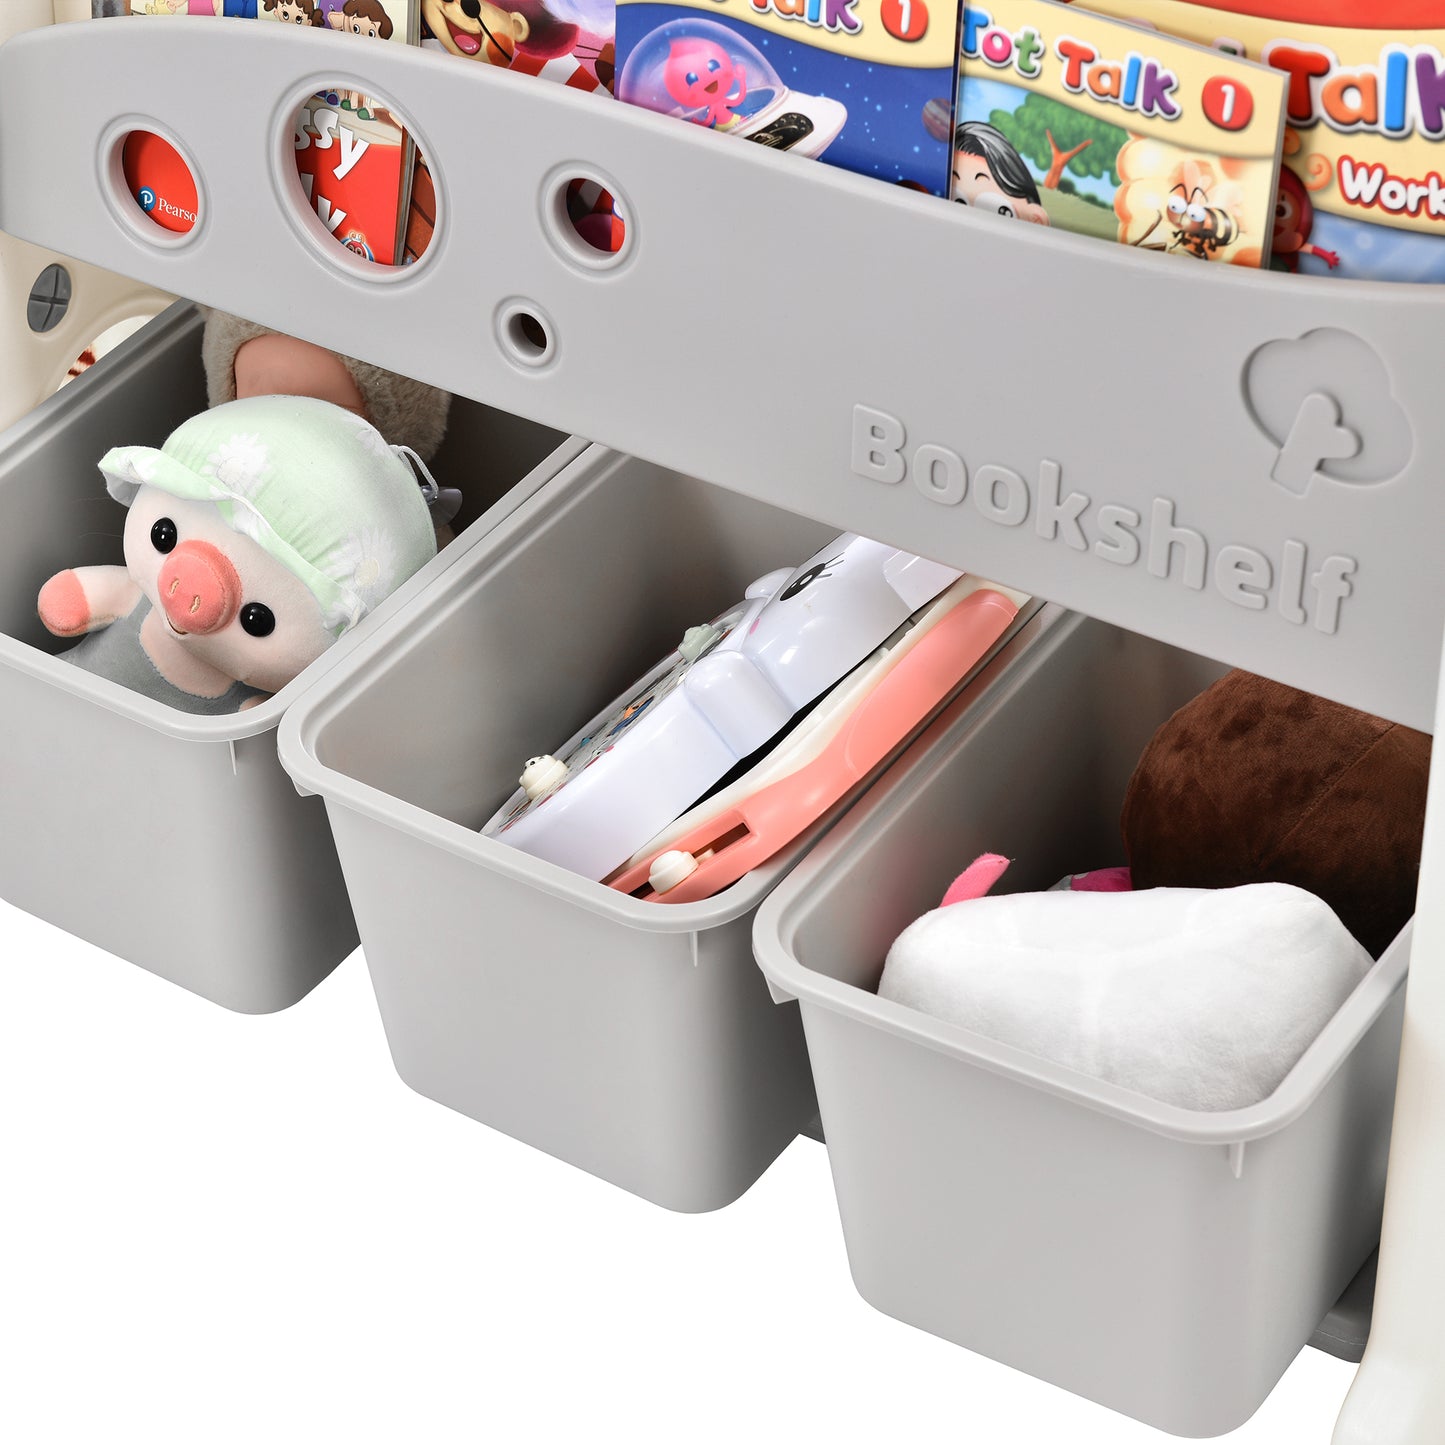 Kids Bookshelf Toy Storage Organizer with 3 Large Bins and 4 Bookshelves, Multi-functional Nursery Organizer Kids Furniture Set with HDPE Shelf and Bins for Playroom, Bedroom, Living Room